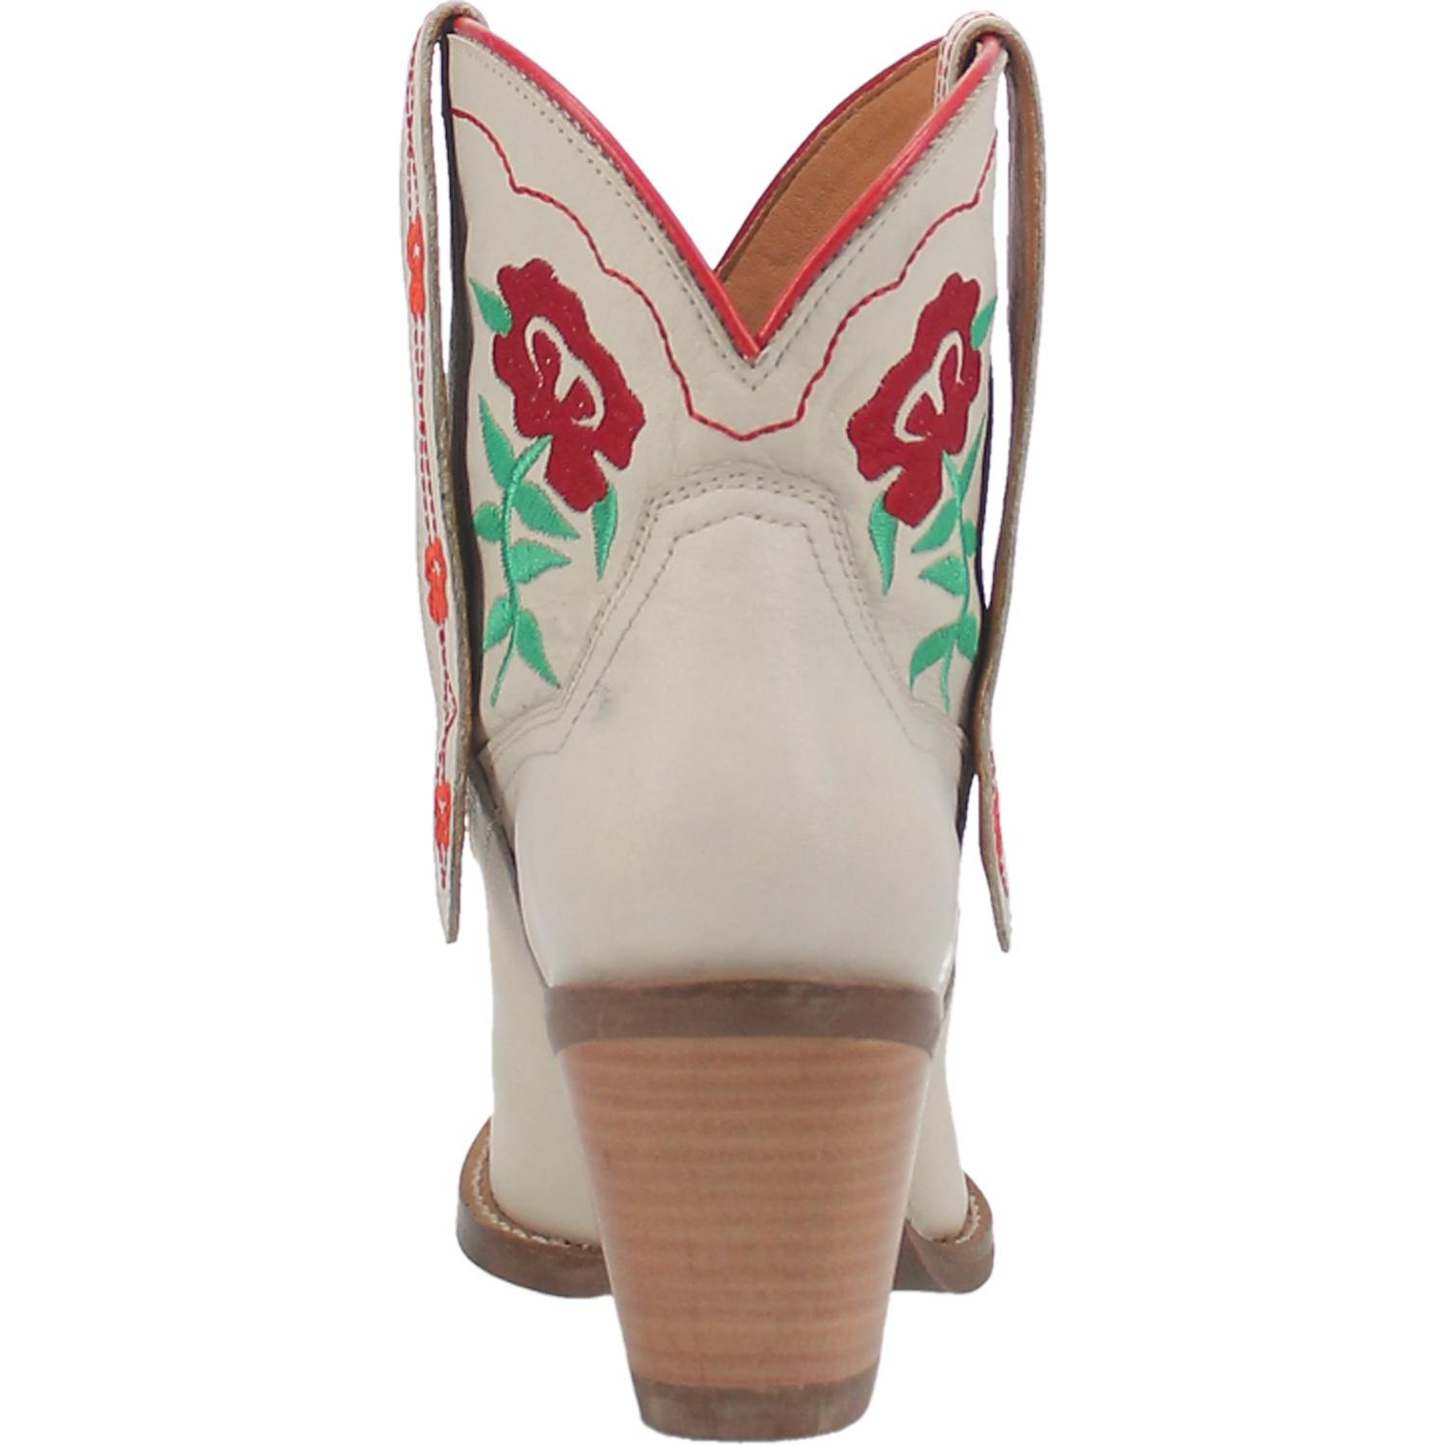 Dingo® Play Pretty White Floral Embroidered Western Bootie DI766-WH15